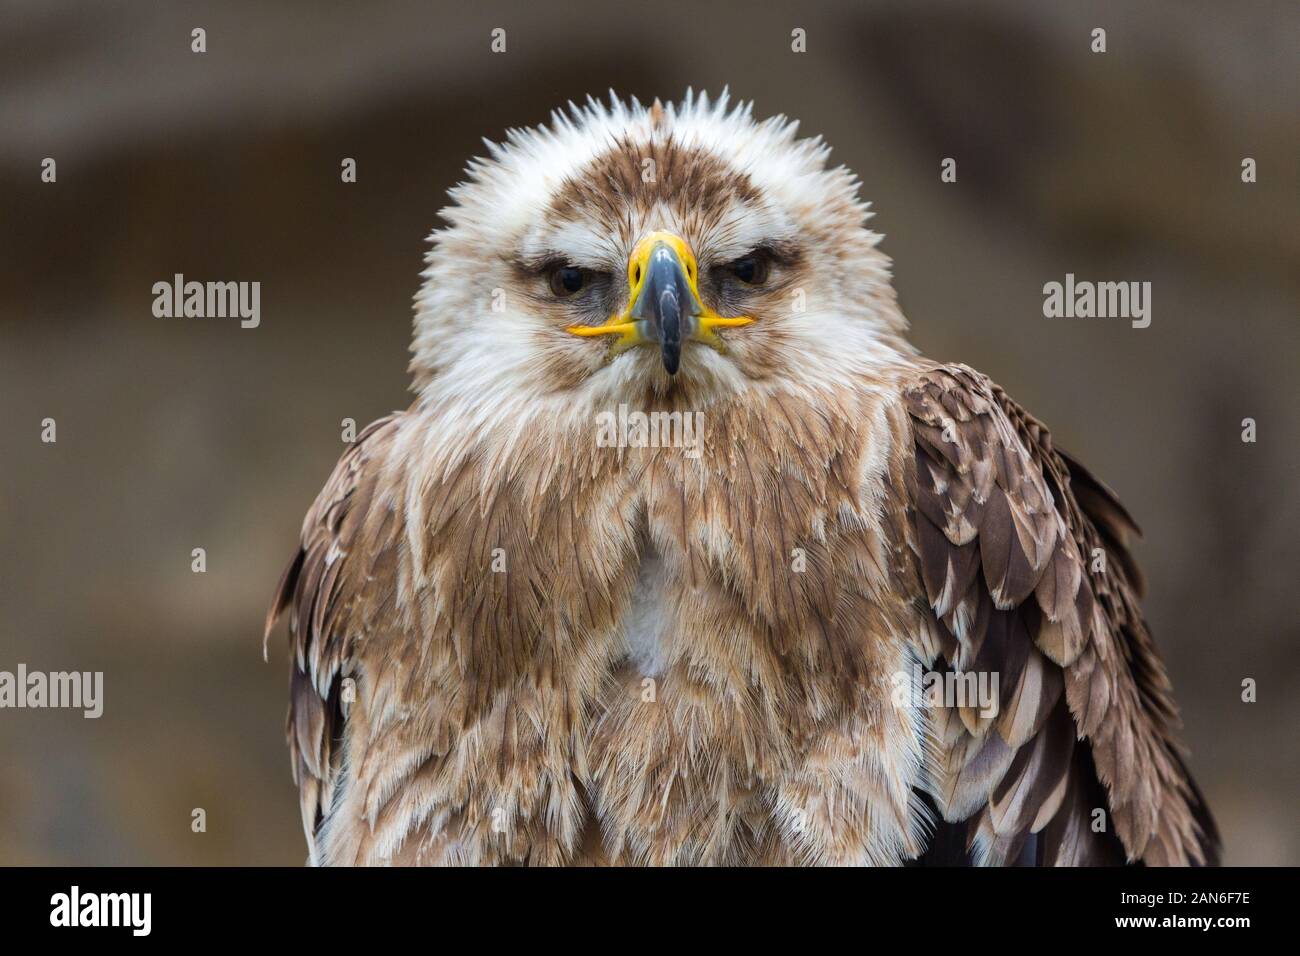 Eastern imperial eagle looking into the camera. Latin name: aquila heliaca. Isolated portrait with upper part of the body and details of head. Stock Photo